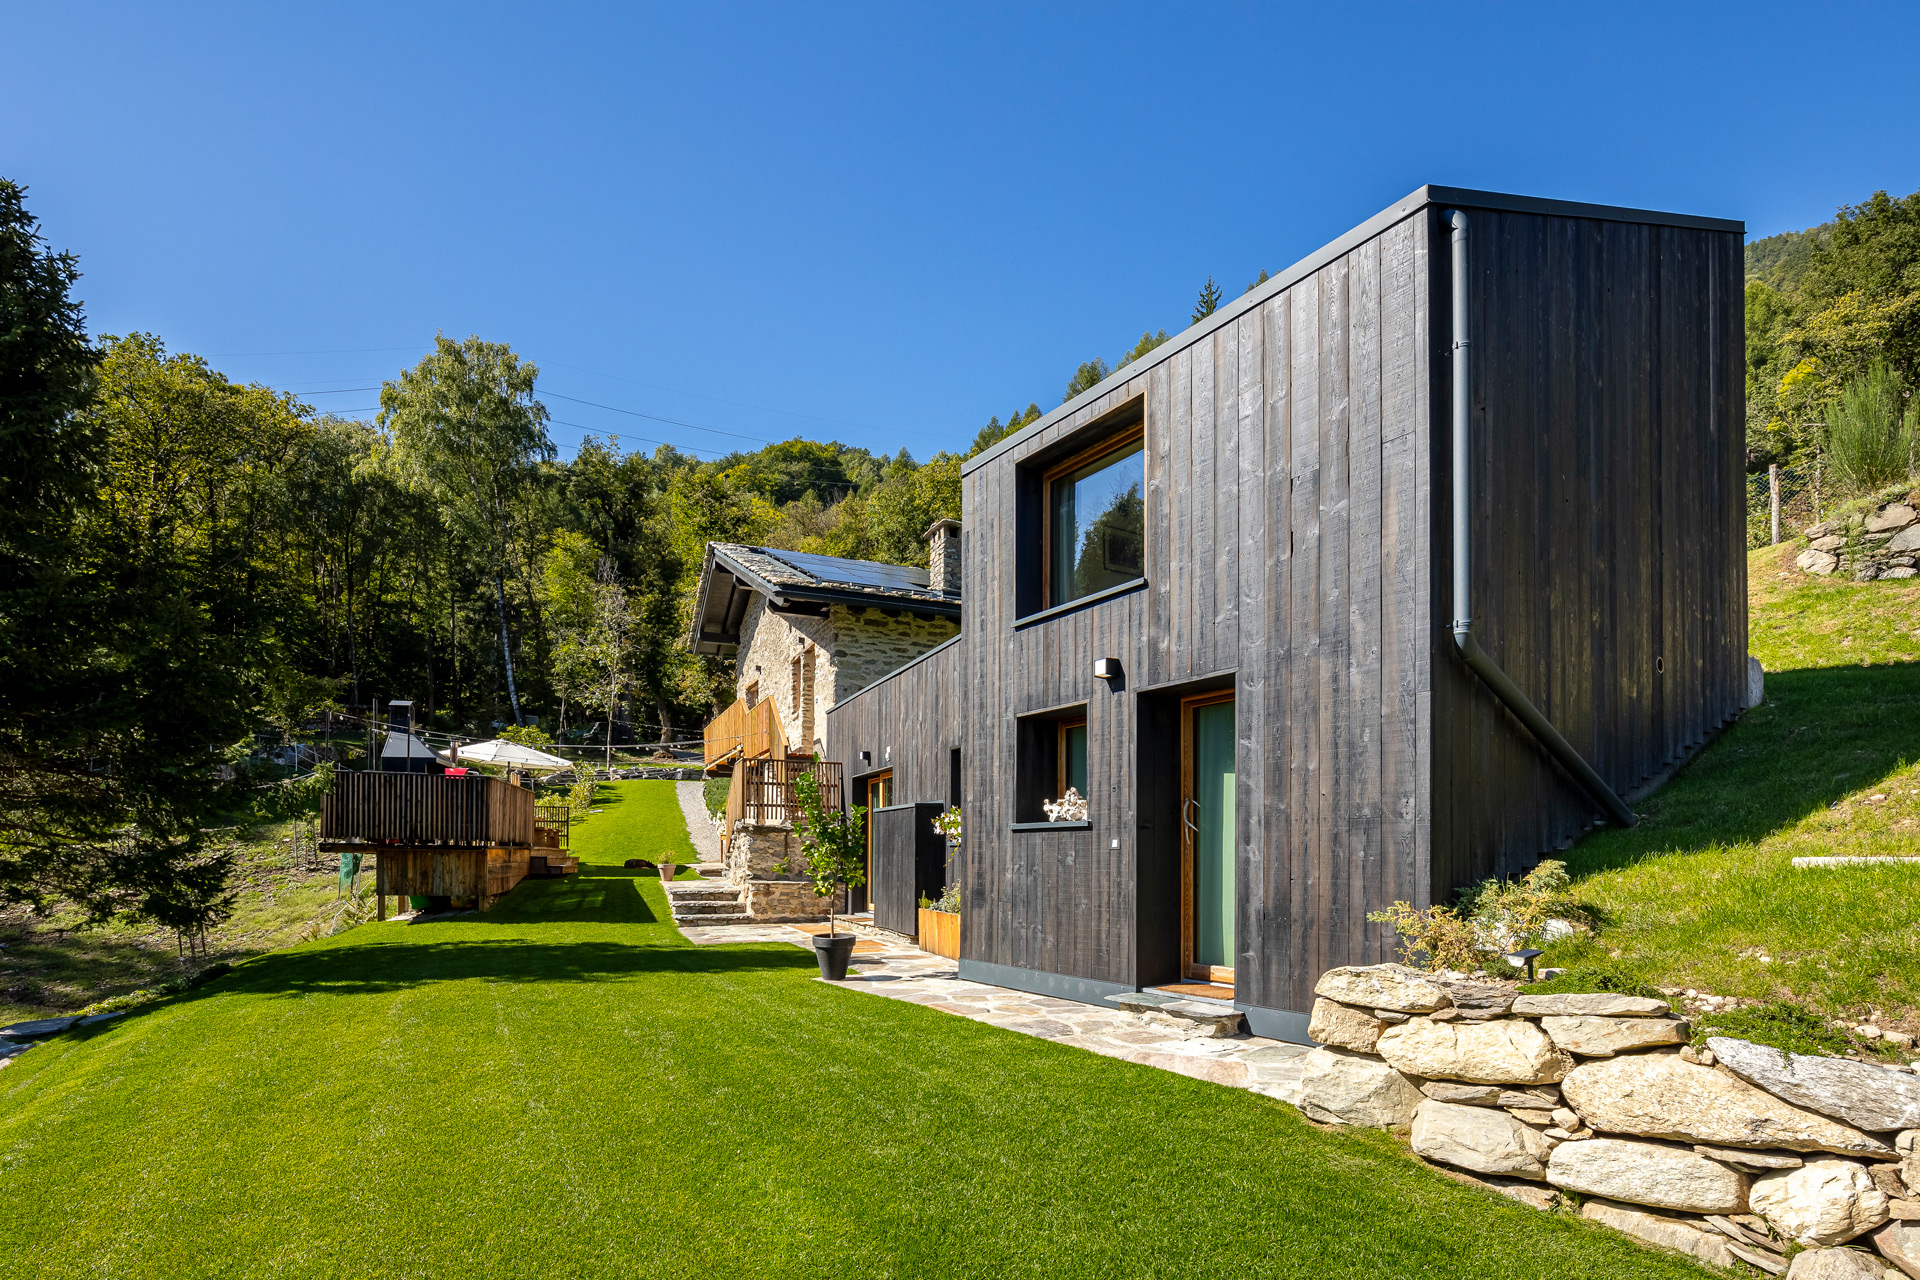 Lodge clad in black wooden panels, with a stone path and views of the Italian hills. 